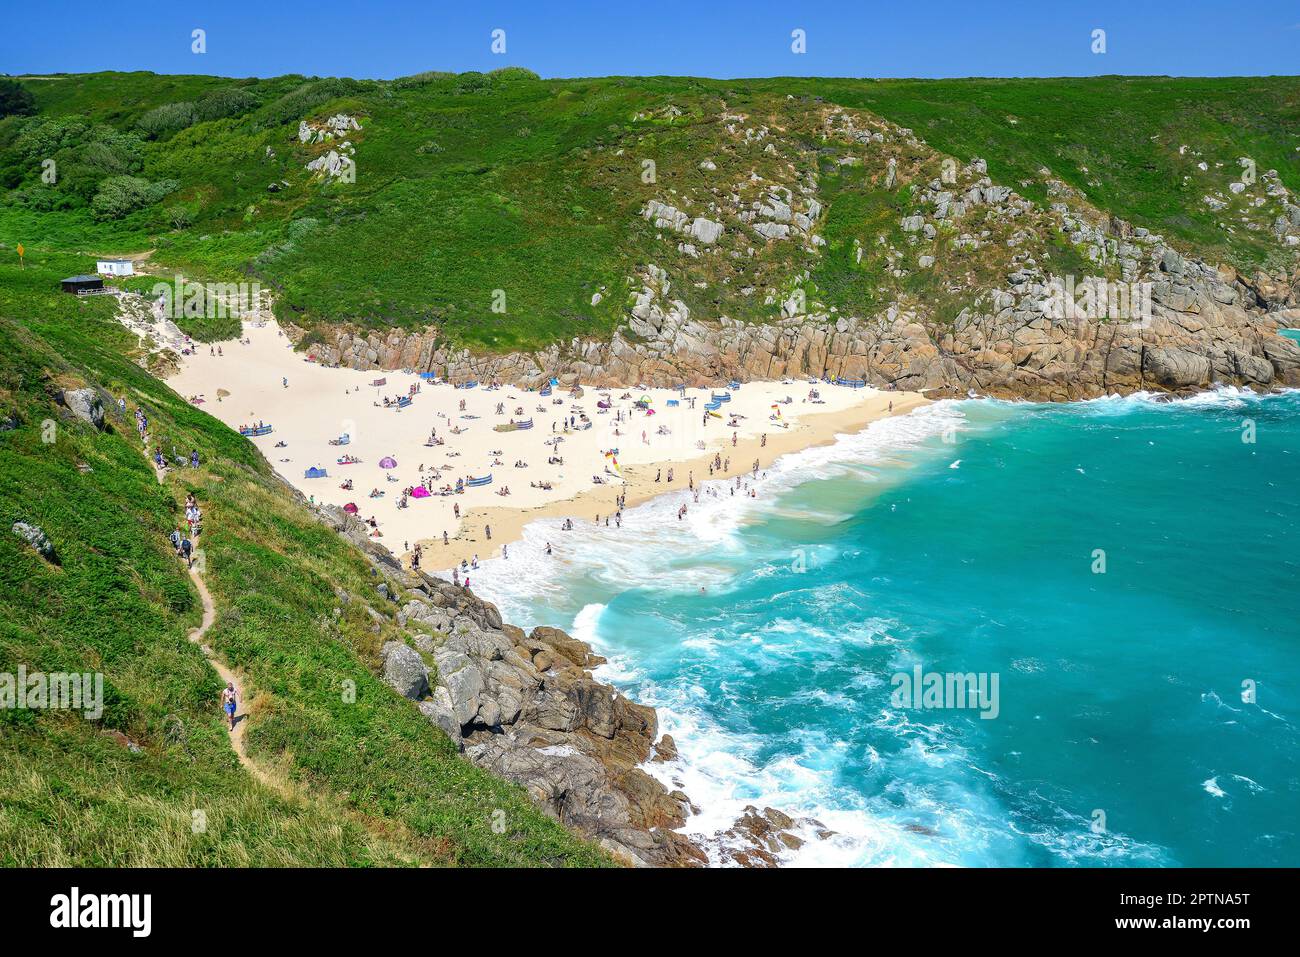 Plage de Porthcurno Porthcurno, Bay, Cornwall, Angleterre, Royaume-Uni Banque D'Images